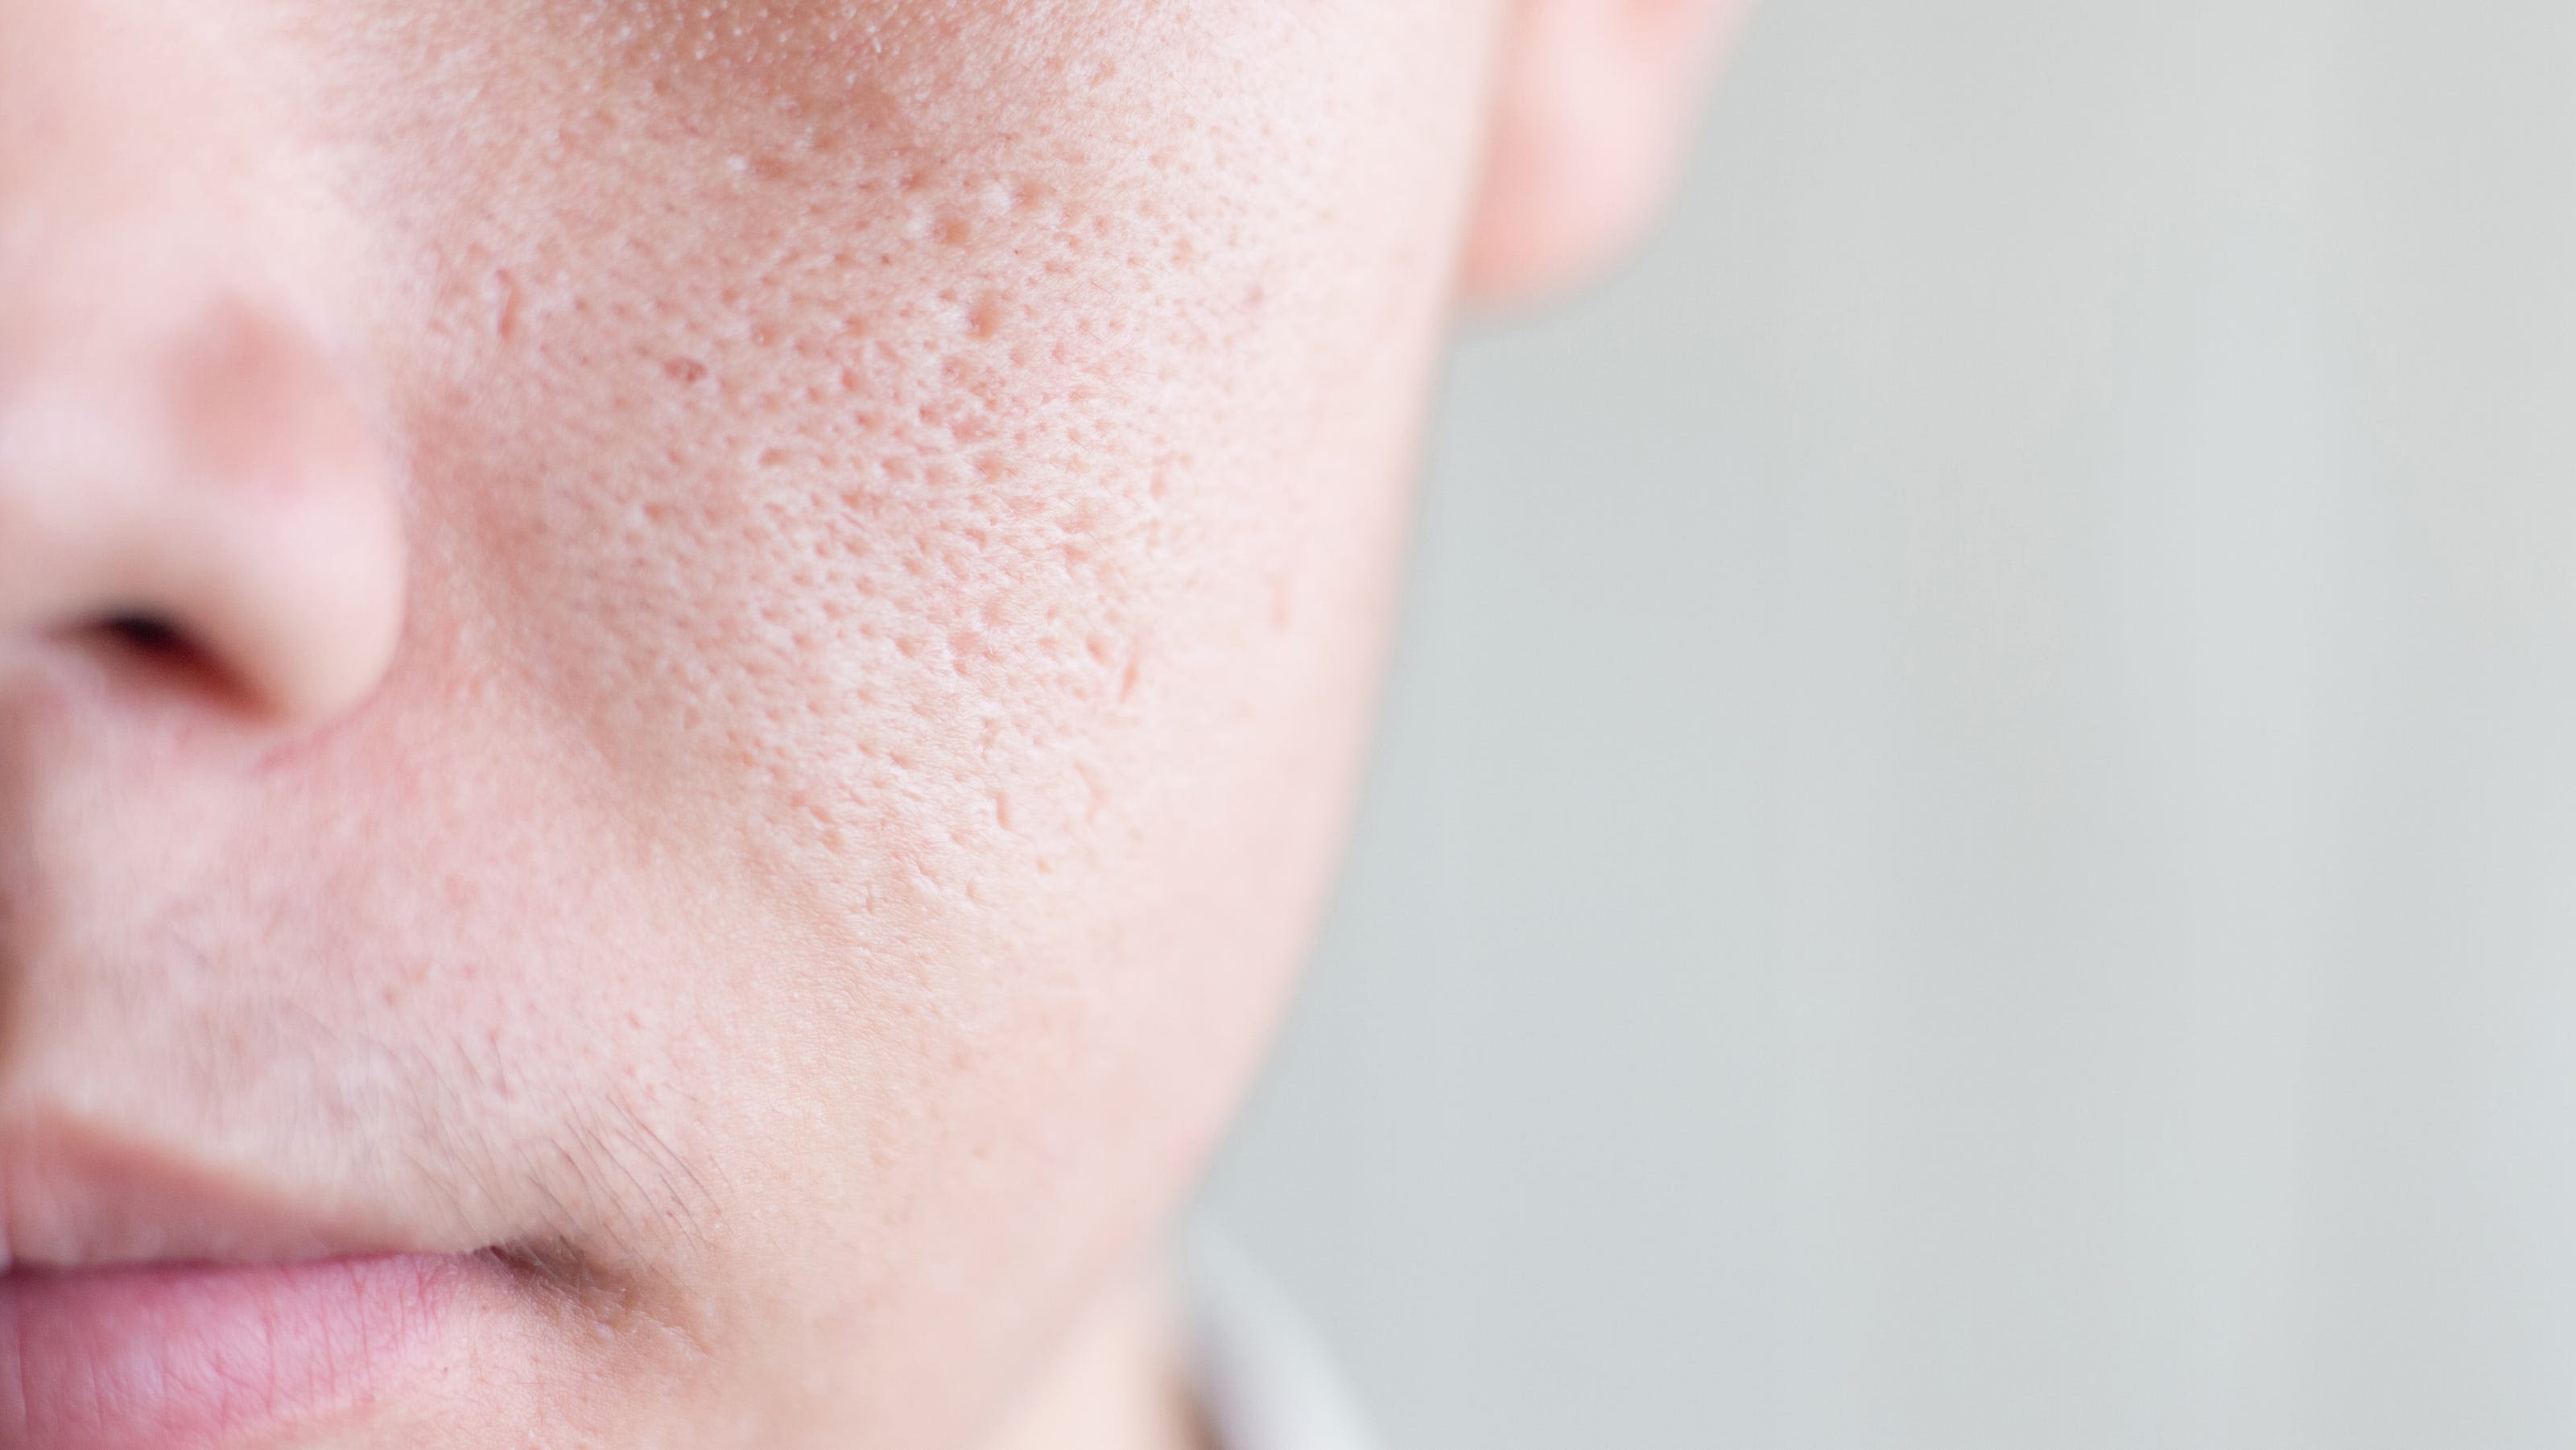 Feel like you have huge pores? Here's what experts say you can do about it.